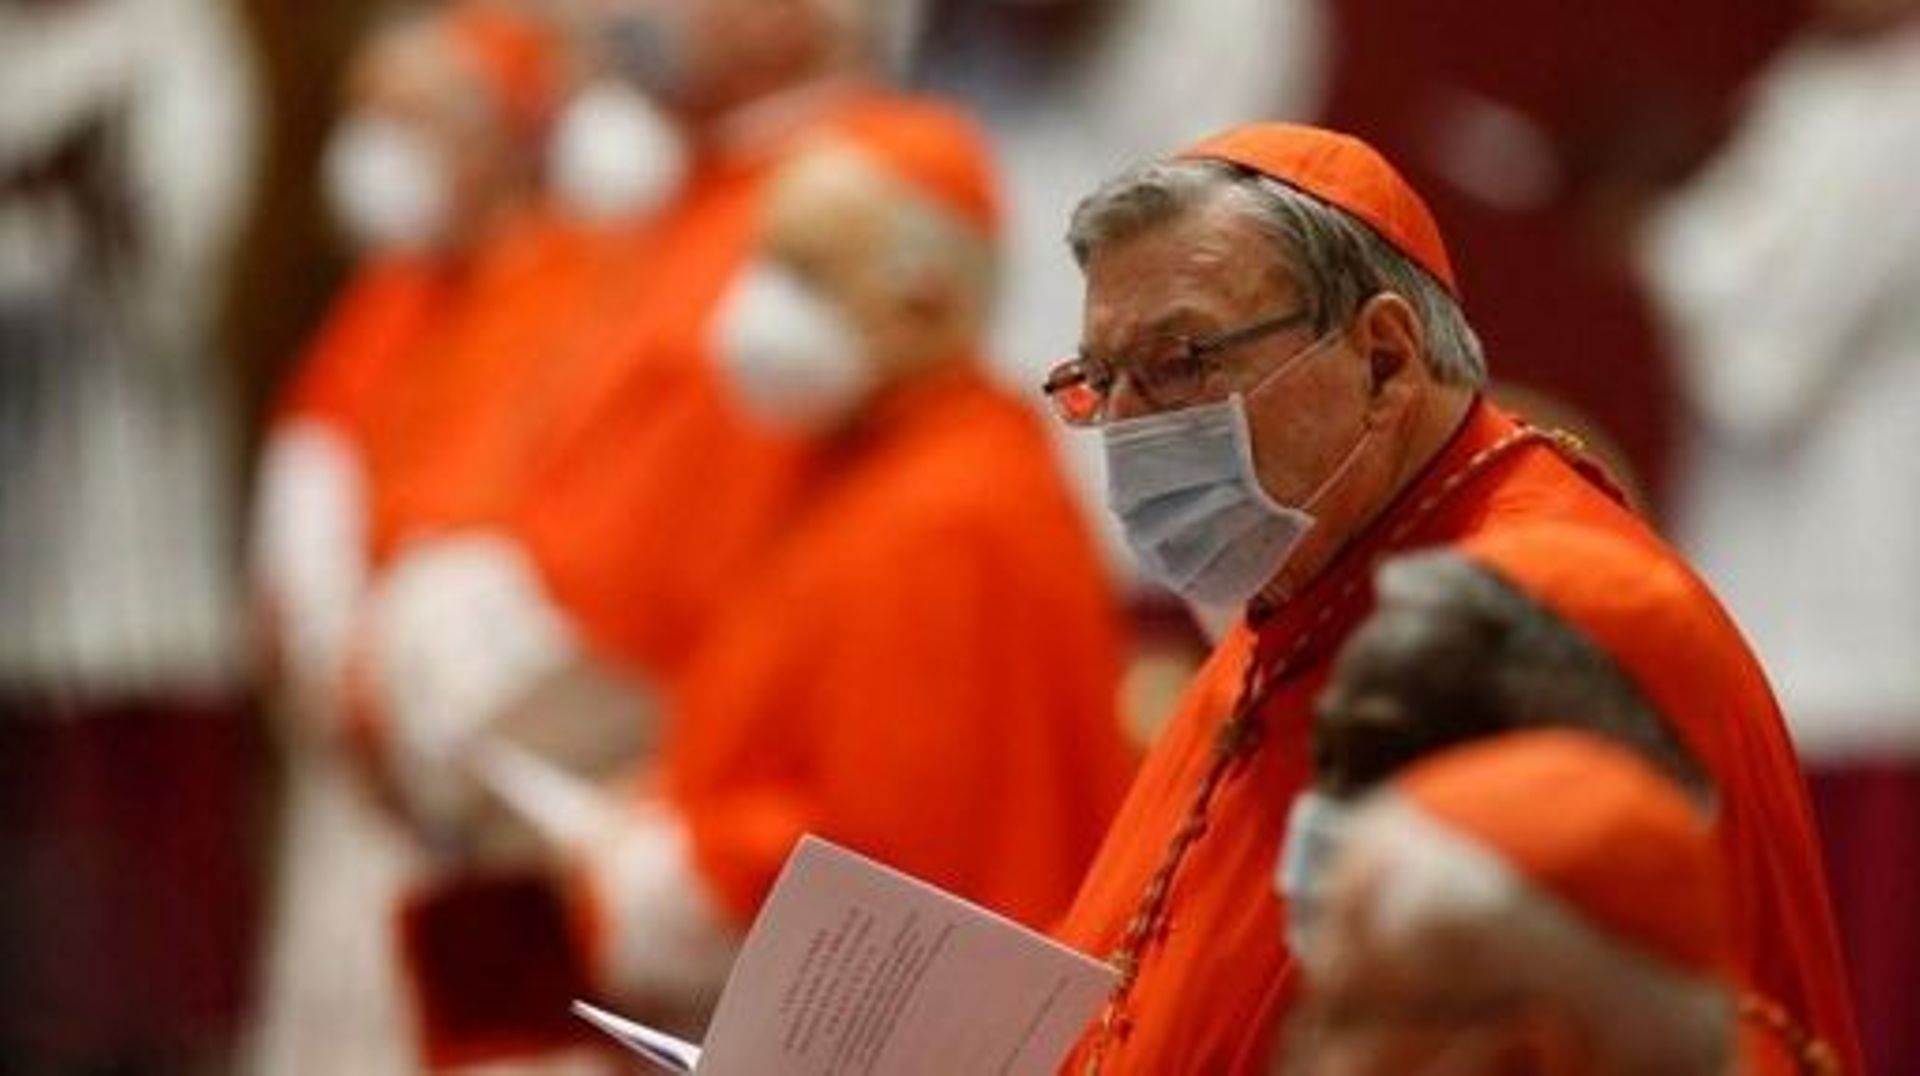 Australian Cardinal George Pell, wearing a face mask, attends a Pope’s a consistory to create 13 new cardinals, on November 28, 2020 at St. Peter’s Basilica in The Vatican. FABIO FRUSTACI / POOL / AFP